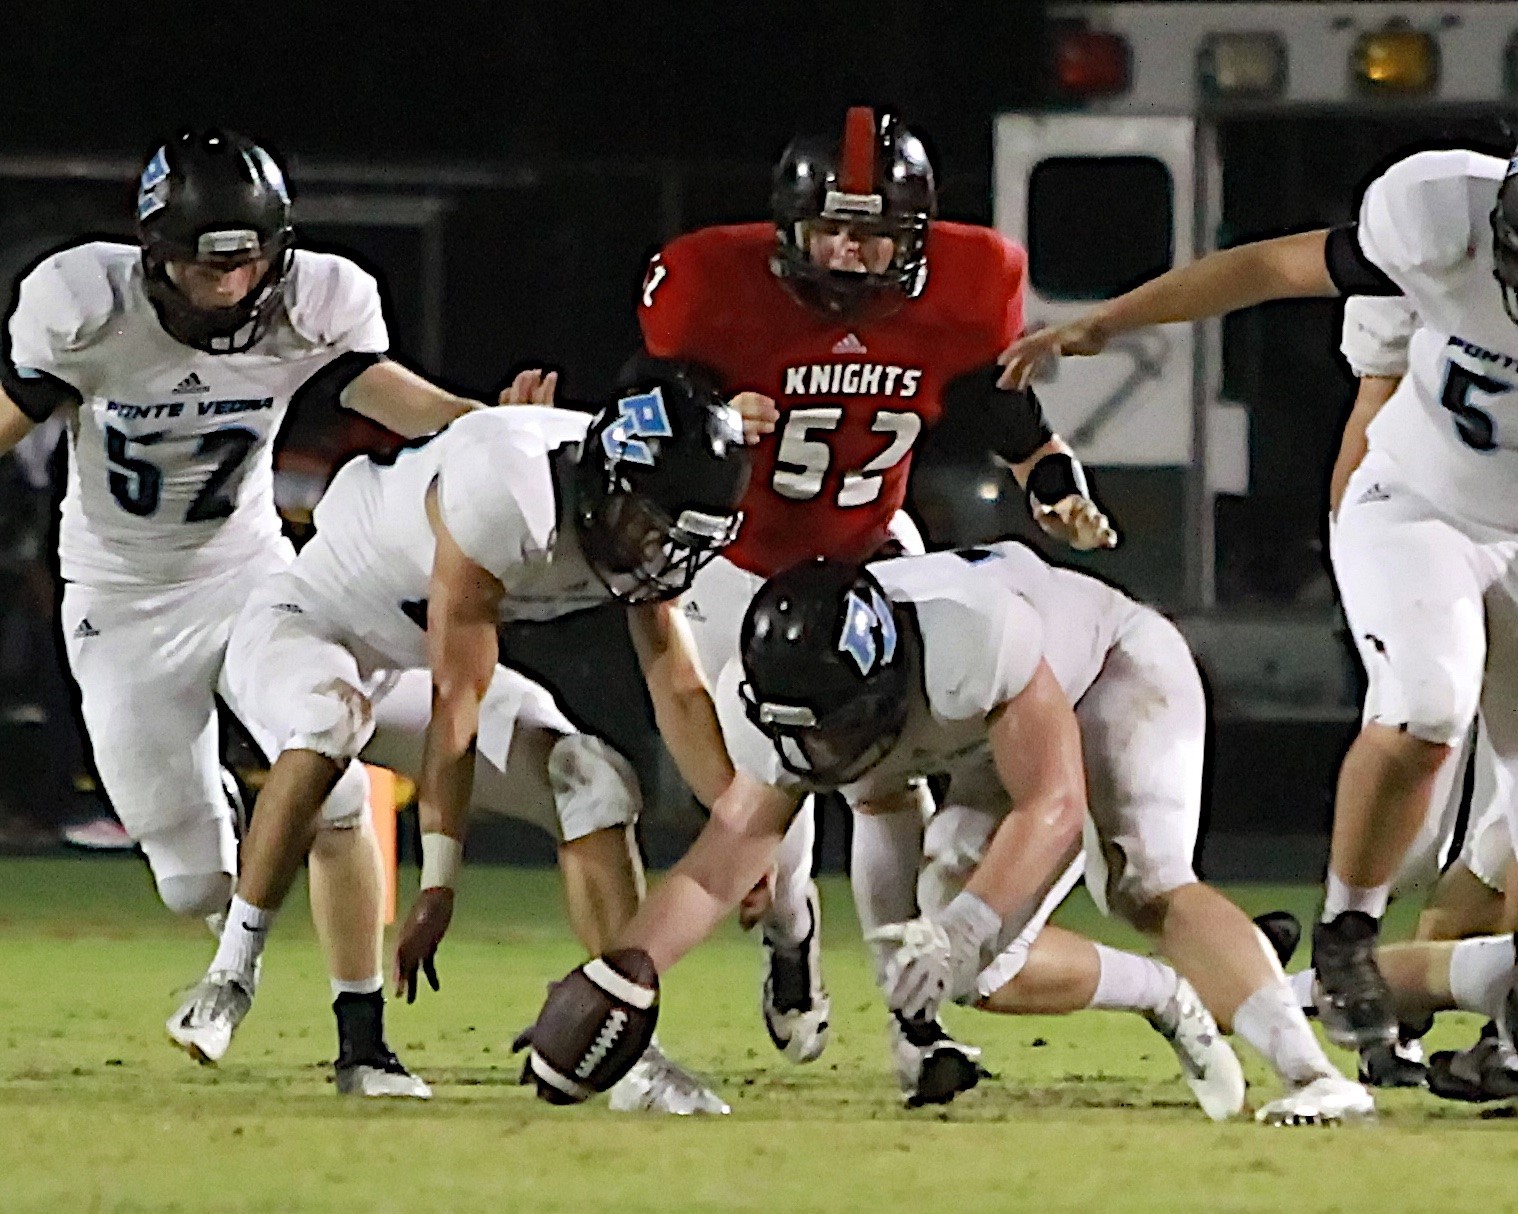 #50 Gibson Pardue of the Sharks recovers a Knightsí fumble.